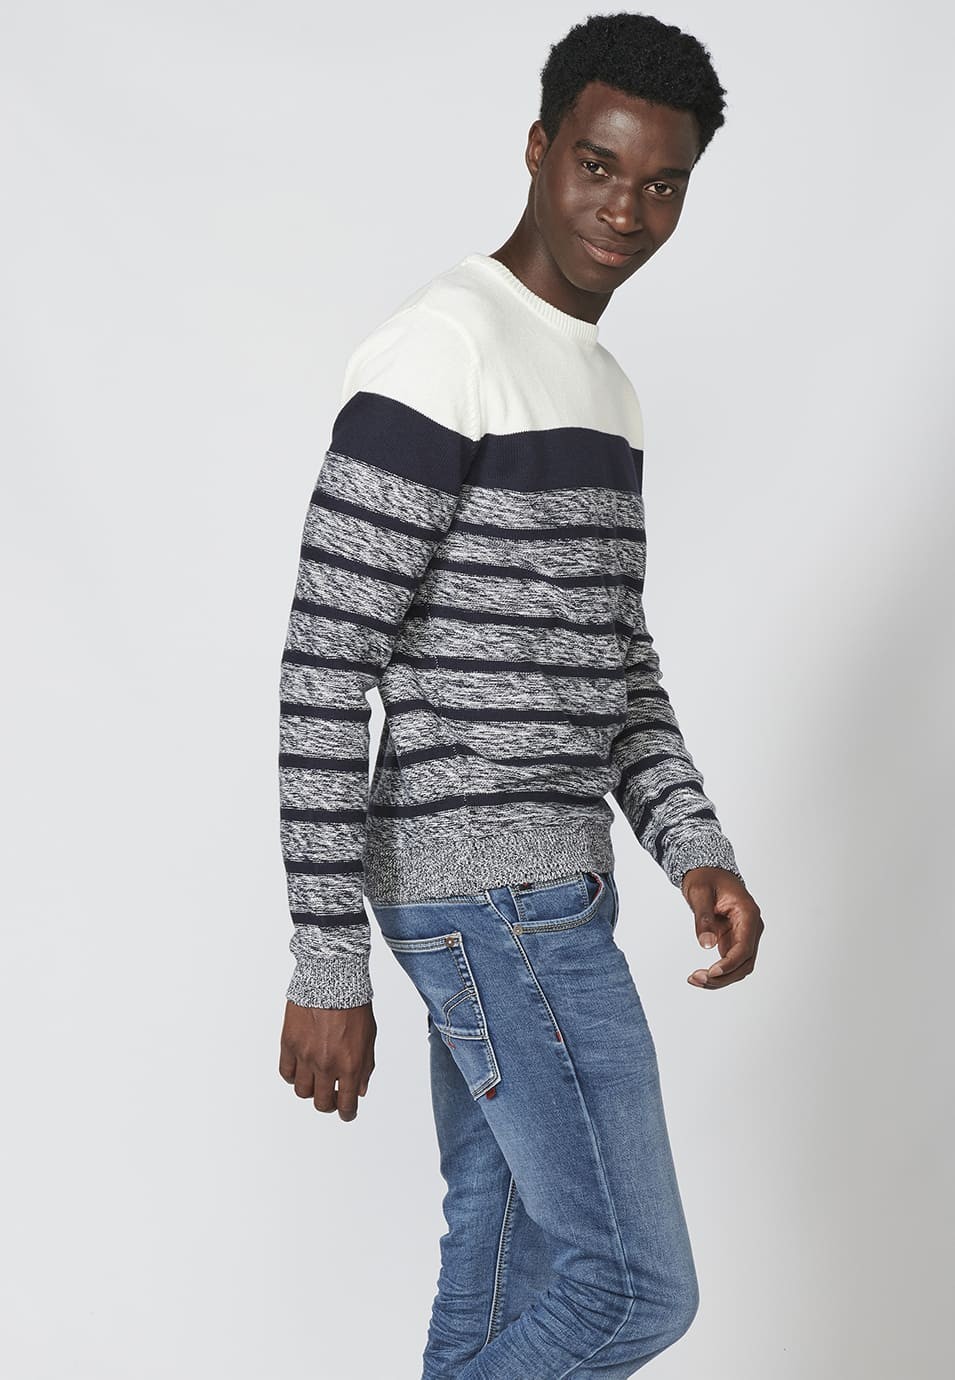 Men's Round Neck Long Sleeve Knitted Sweater